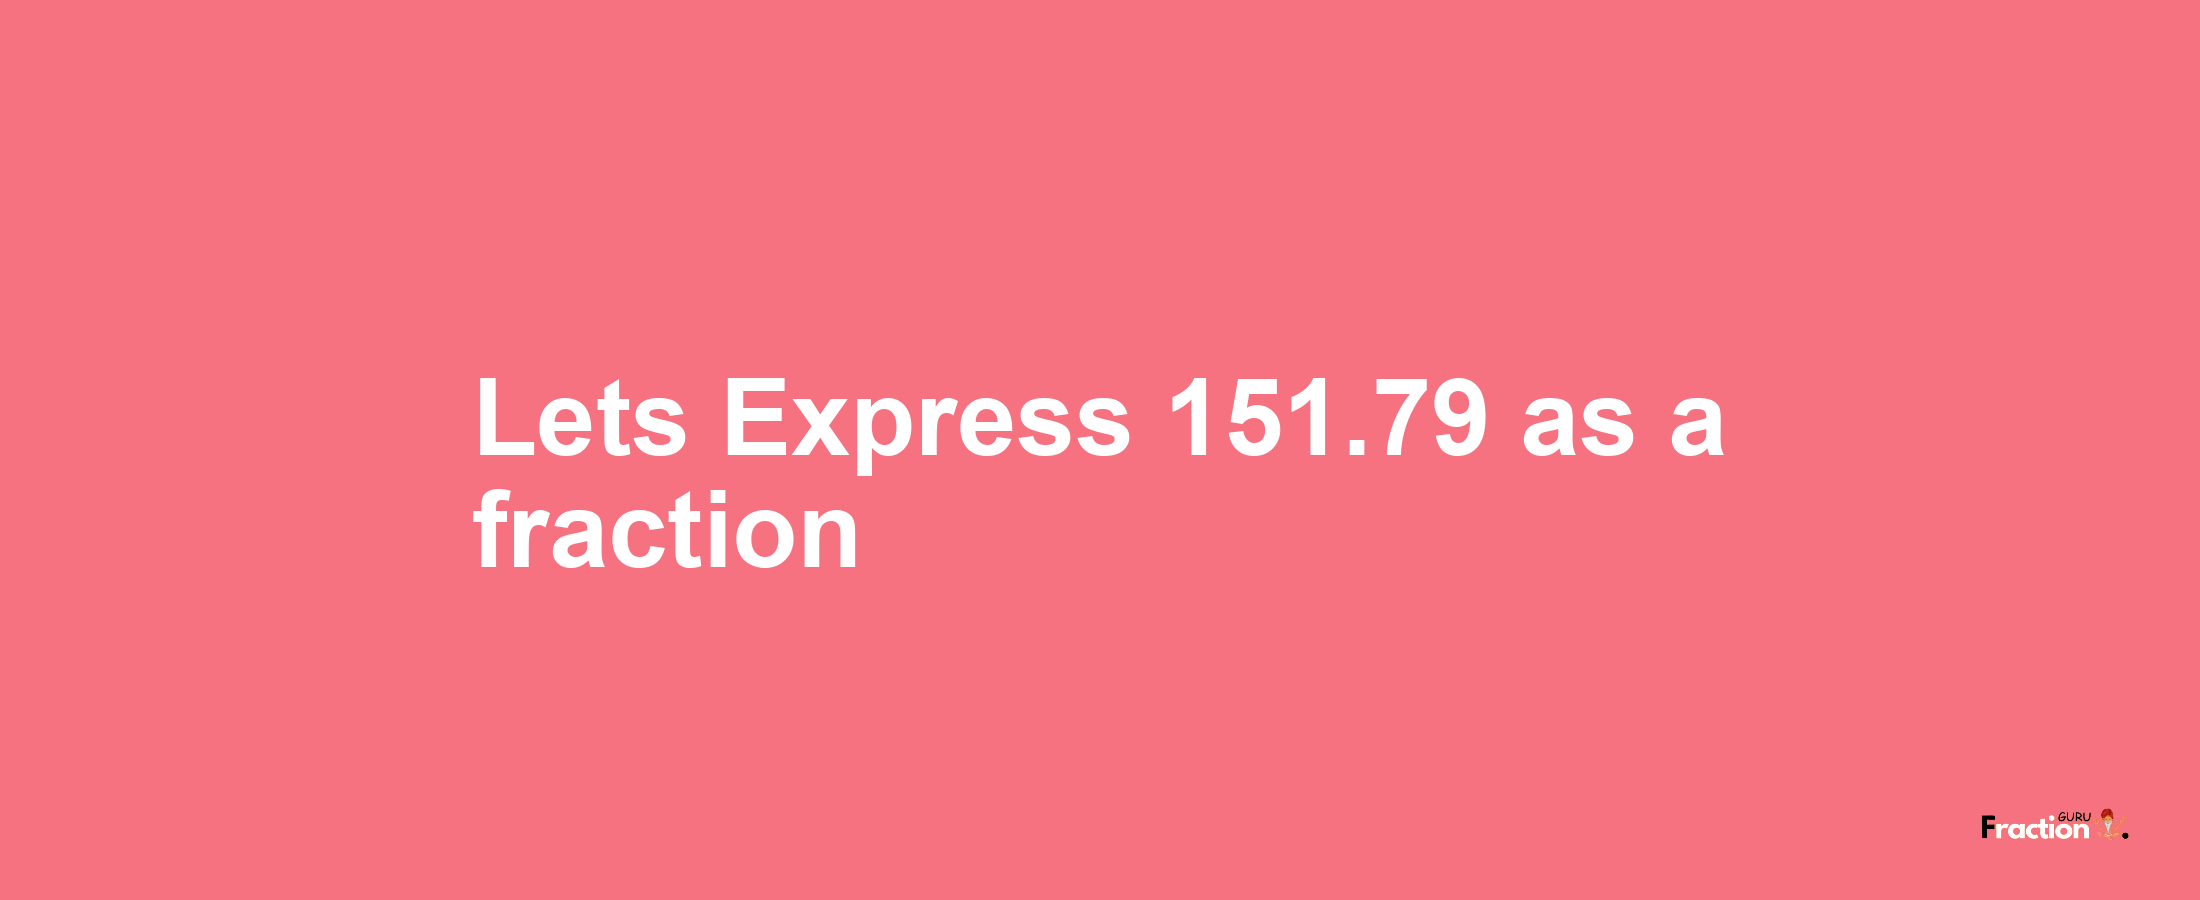 Lets Express 151.79 as afraction